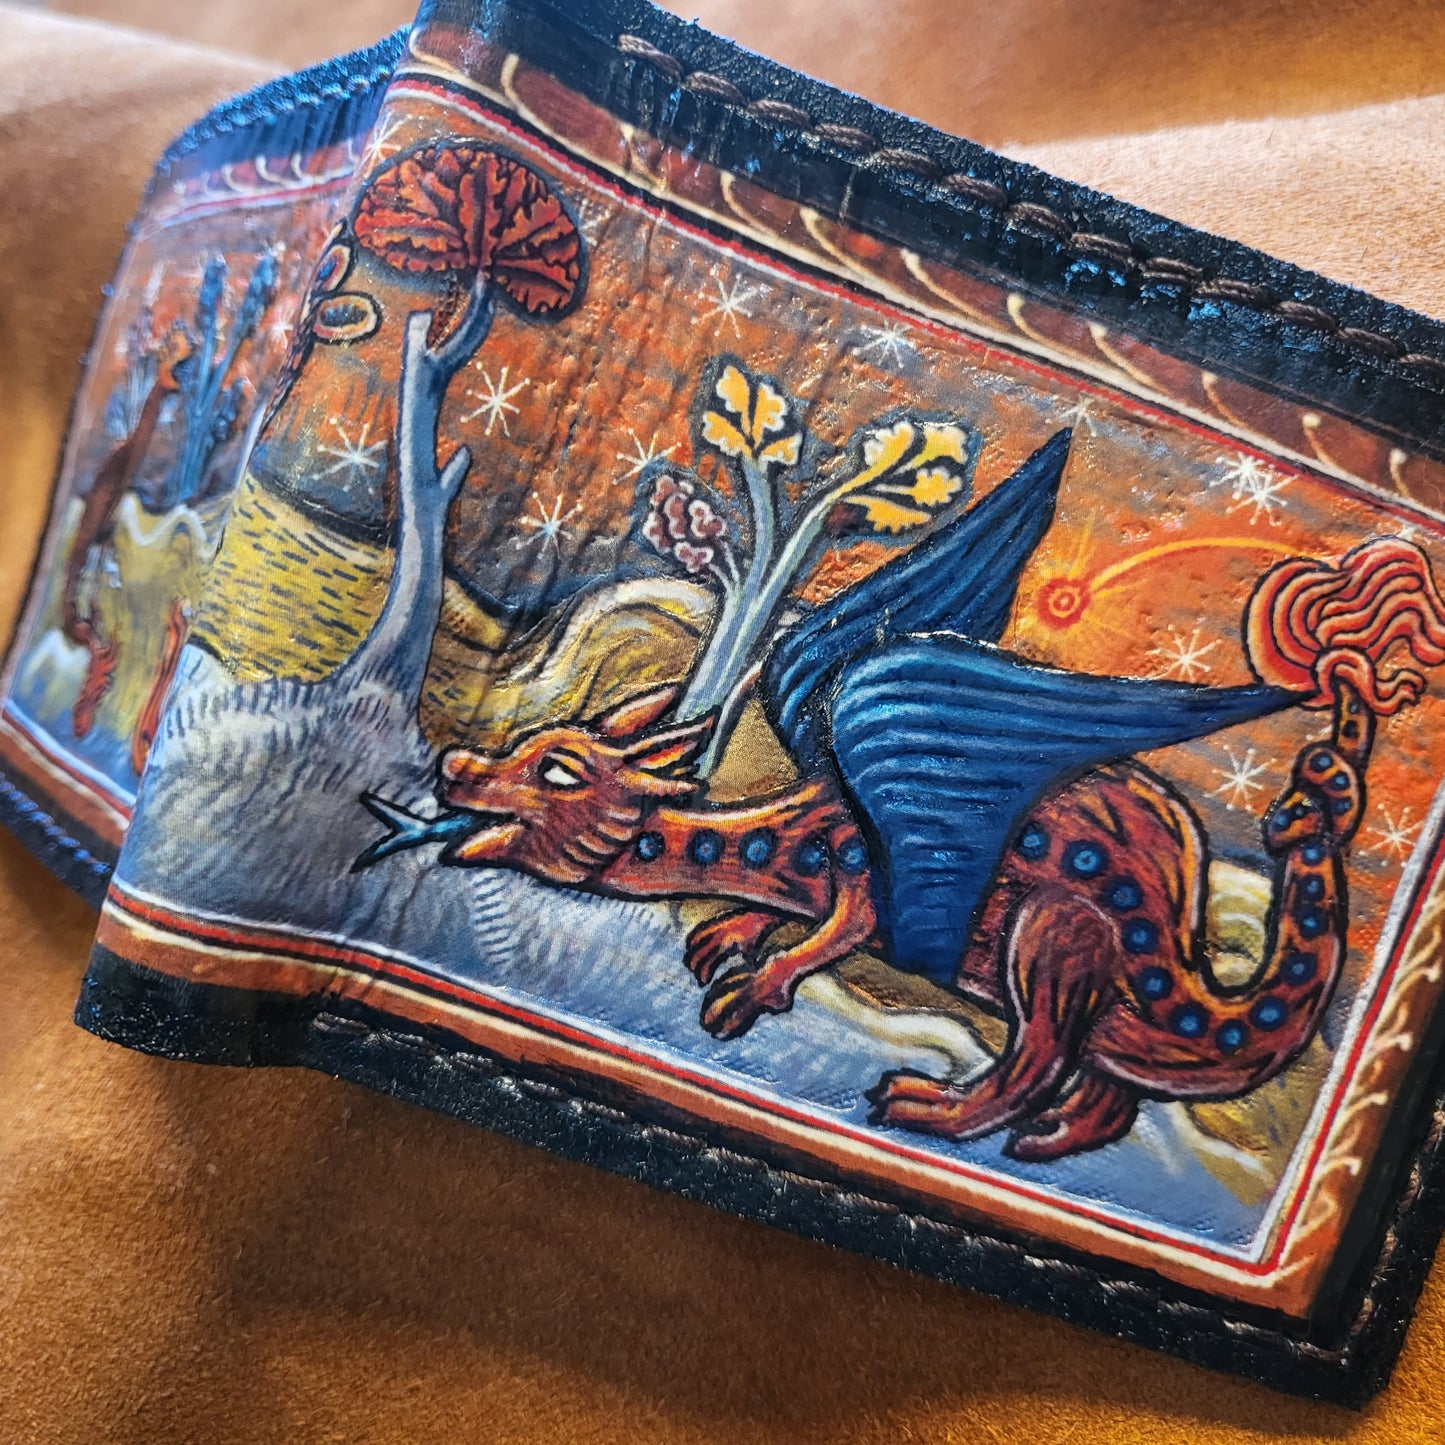 Medieval manuscript pokealchemy -3D textured surface - Hand stamped -Charmander transmutations-evolutions  - Leather Wallet - Handcrafted